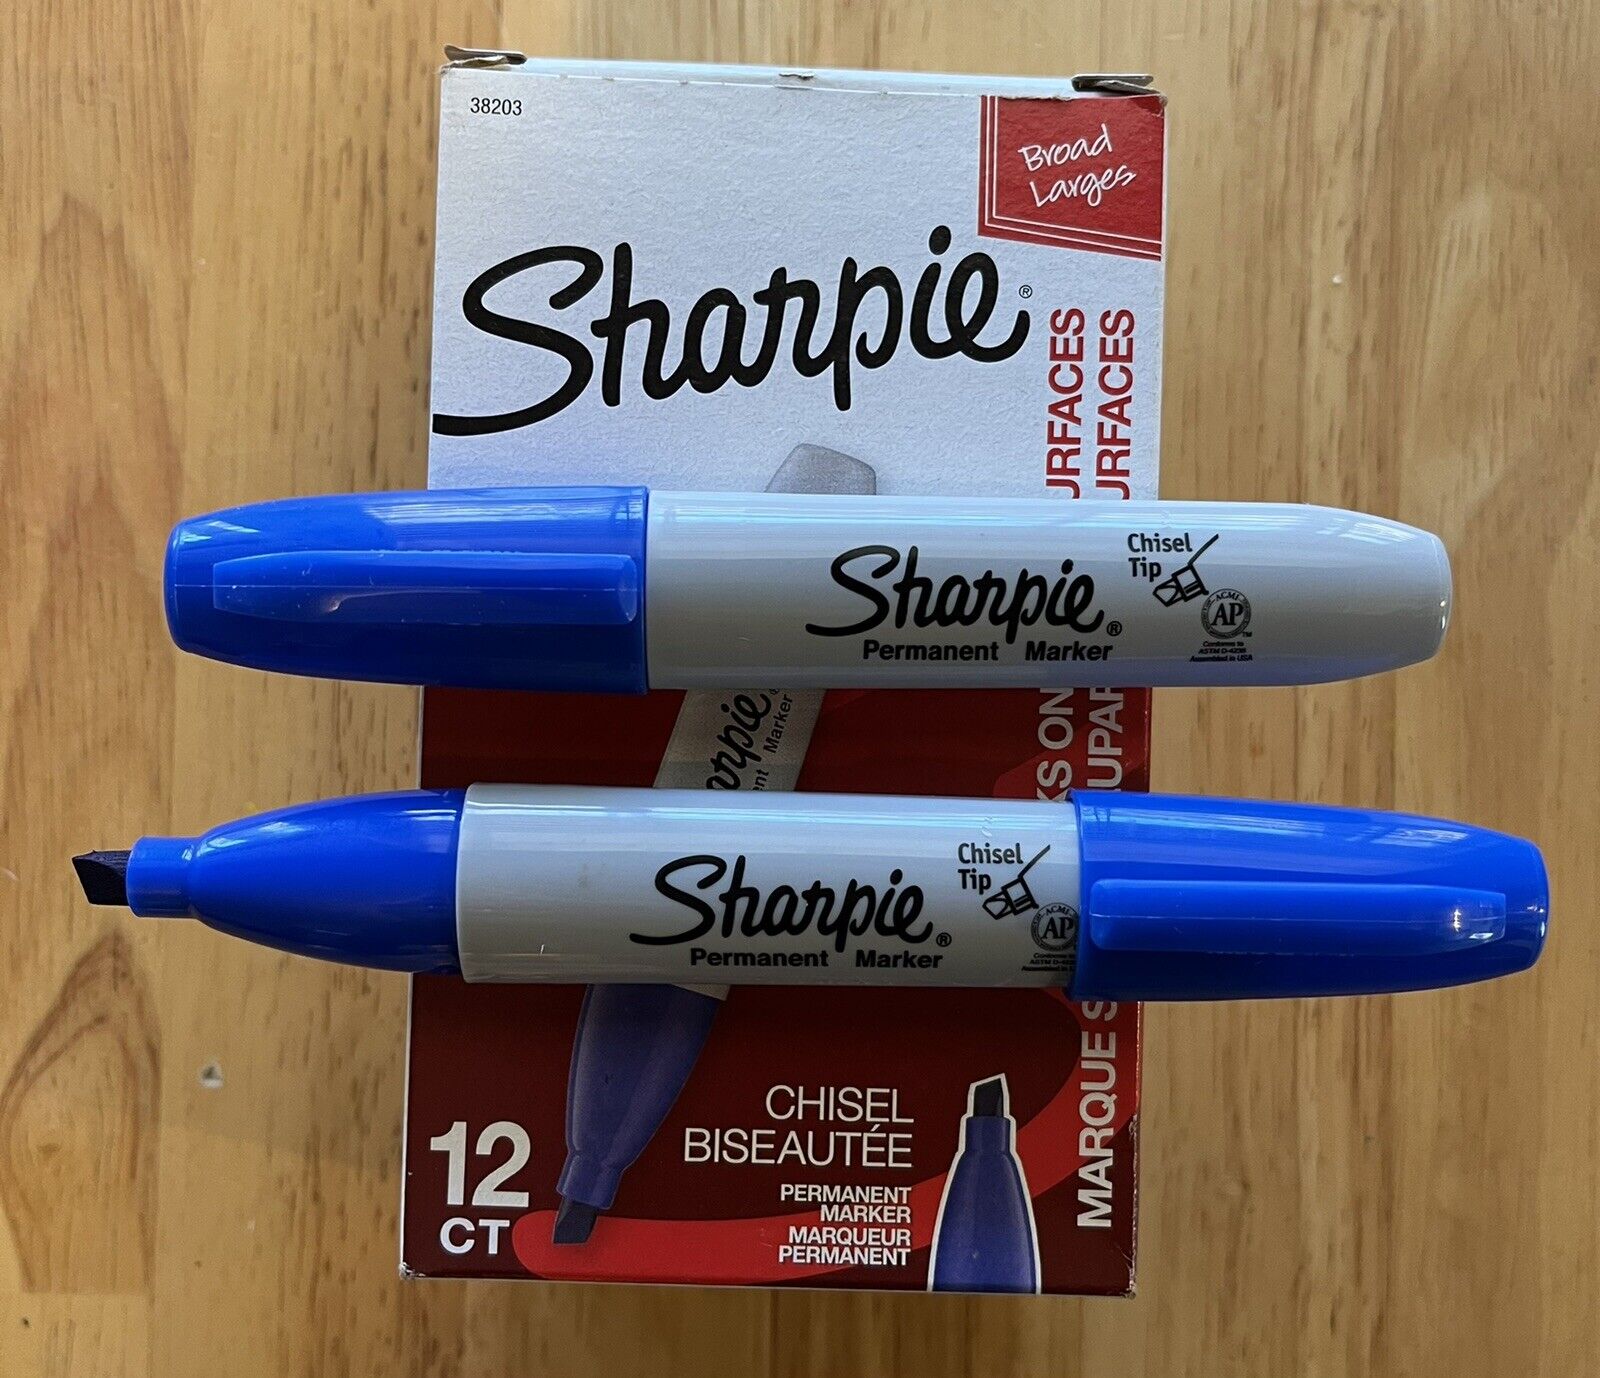 One (1)- Box of 12 SHARPIE Permanent Markers Blue Chisel Tip 382